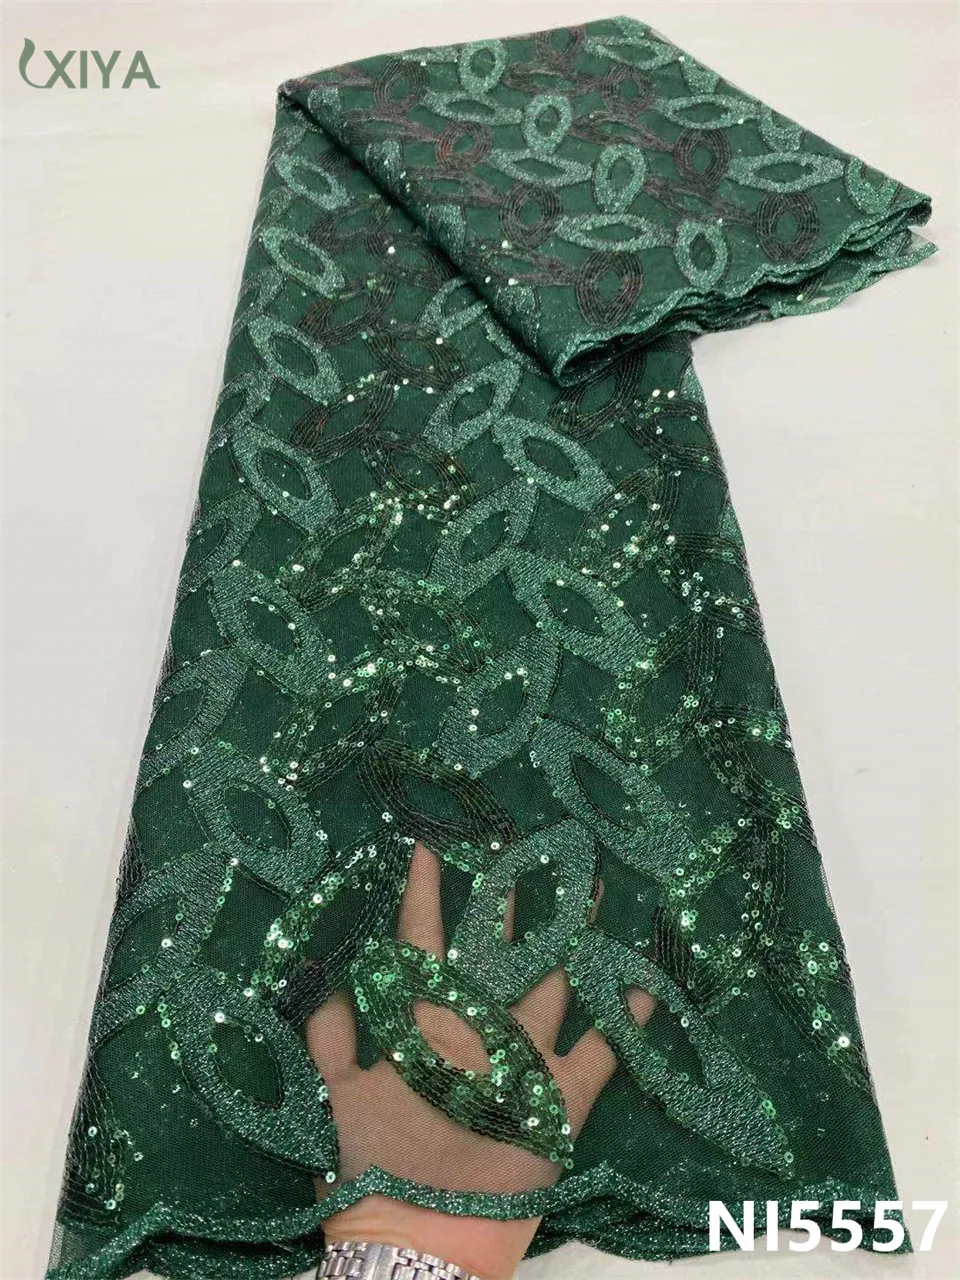 

Nigerian Green Sequin Lace Fabric French Tulle Lace Fabric High Quality African Net Mesh Lace Fabric with Sequins NI5557